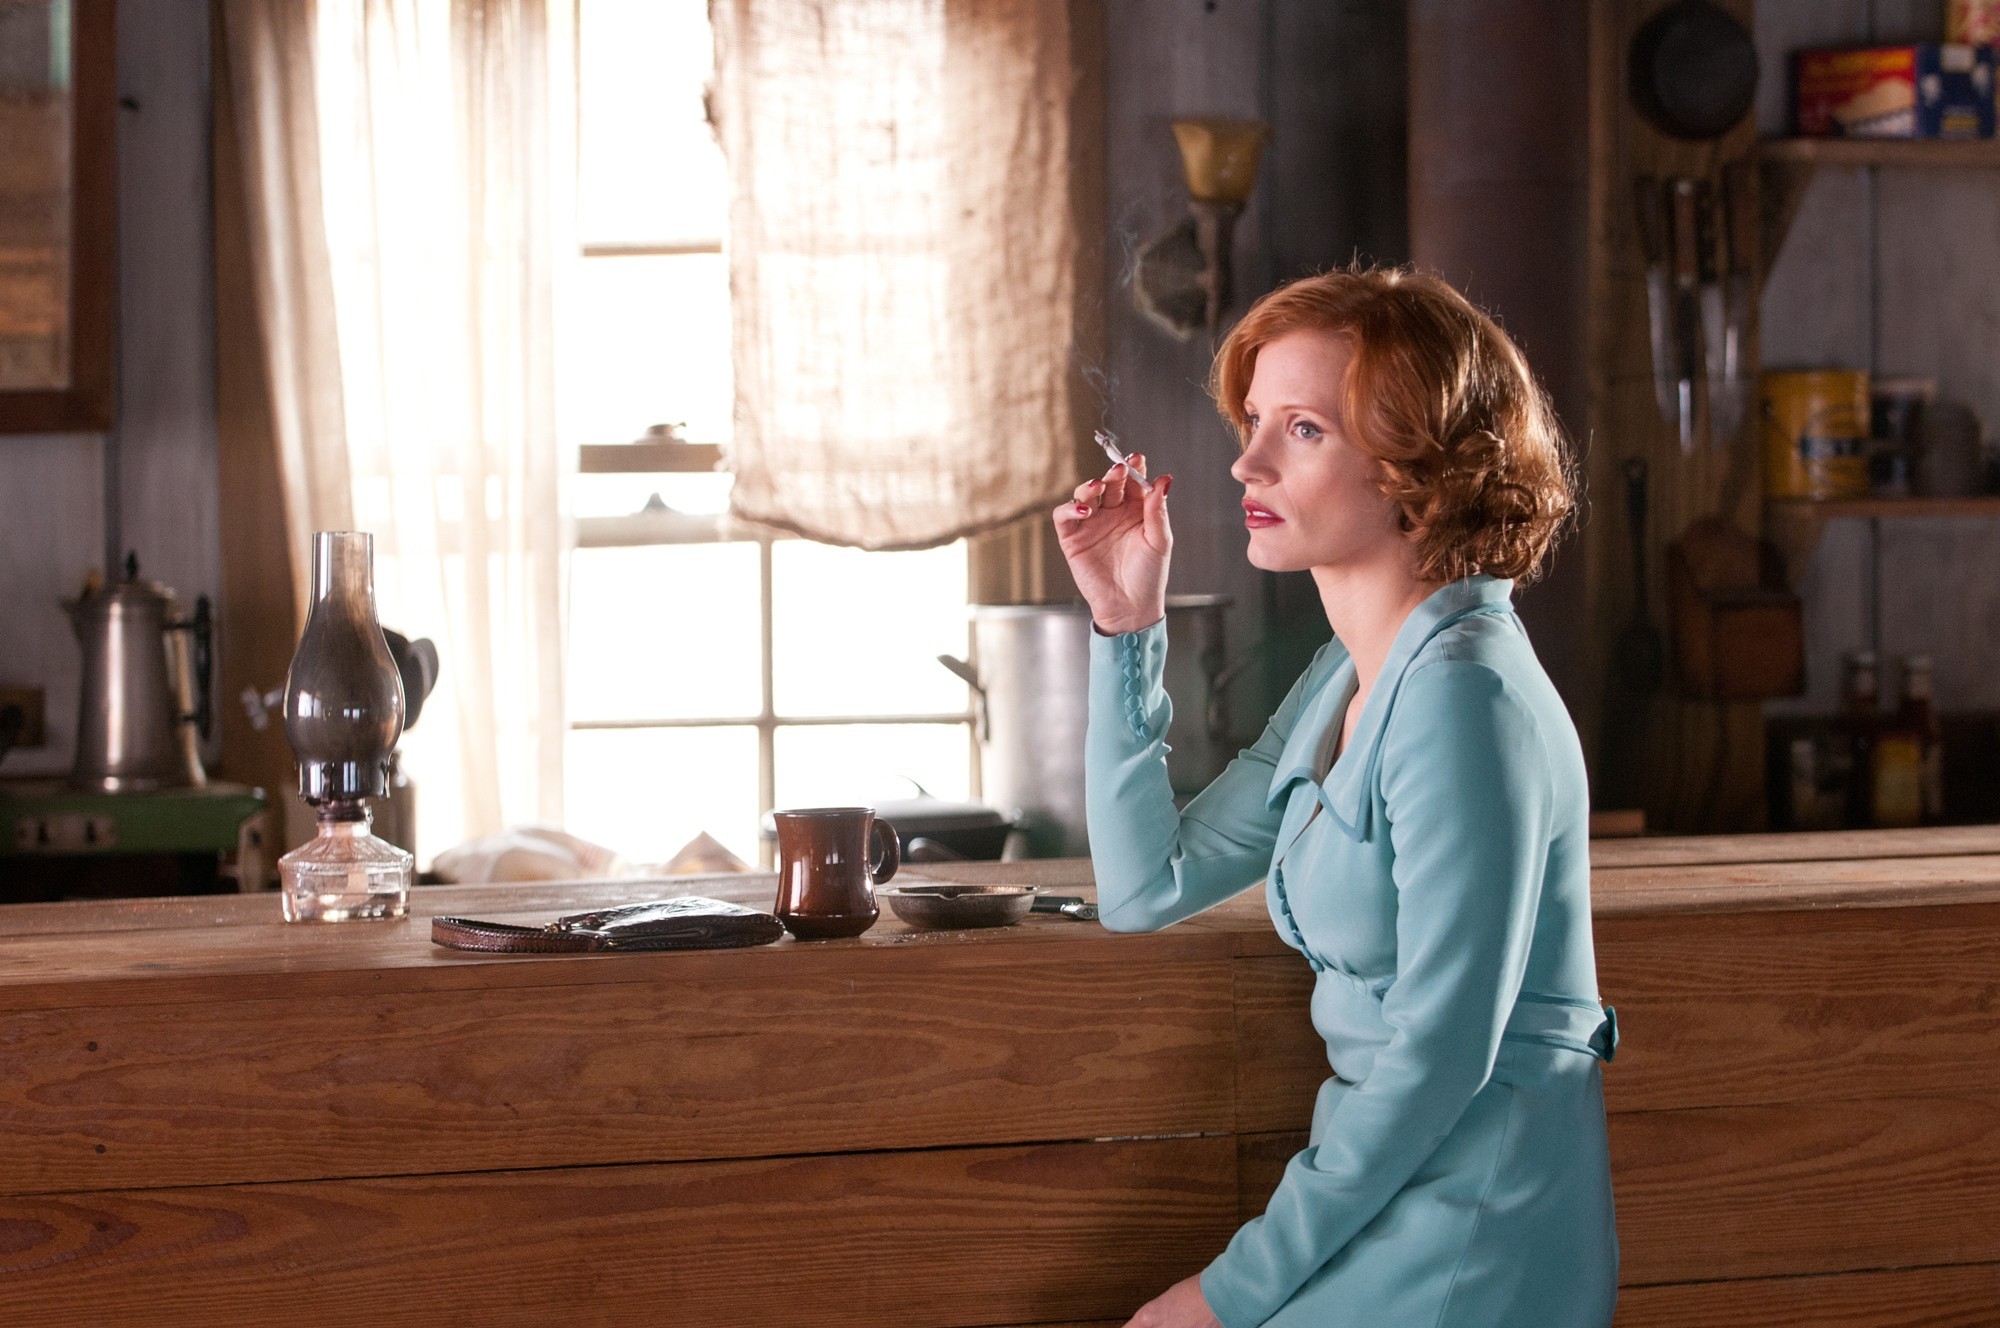 Jessica Chastain stars as Maggie in The Weinstein Company's Lawless (2012)